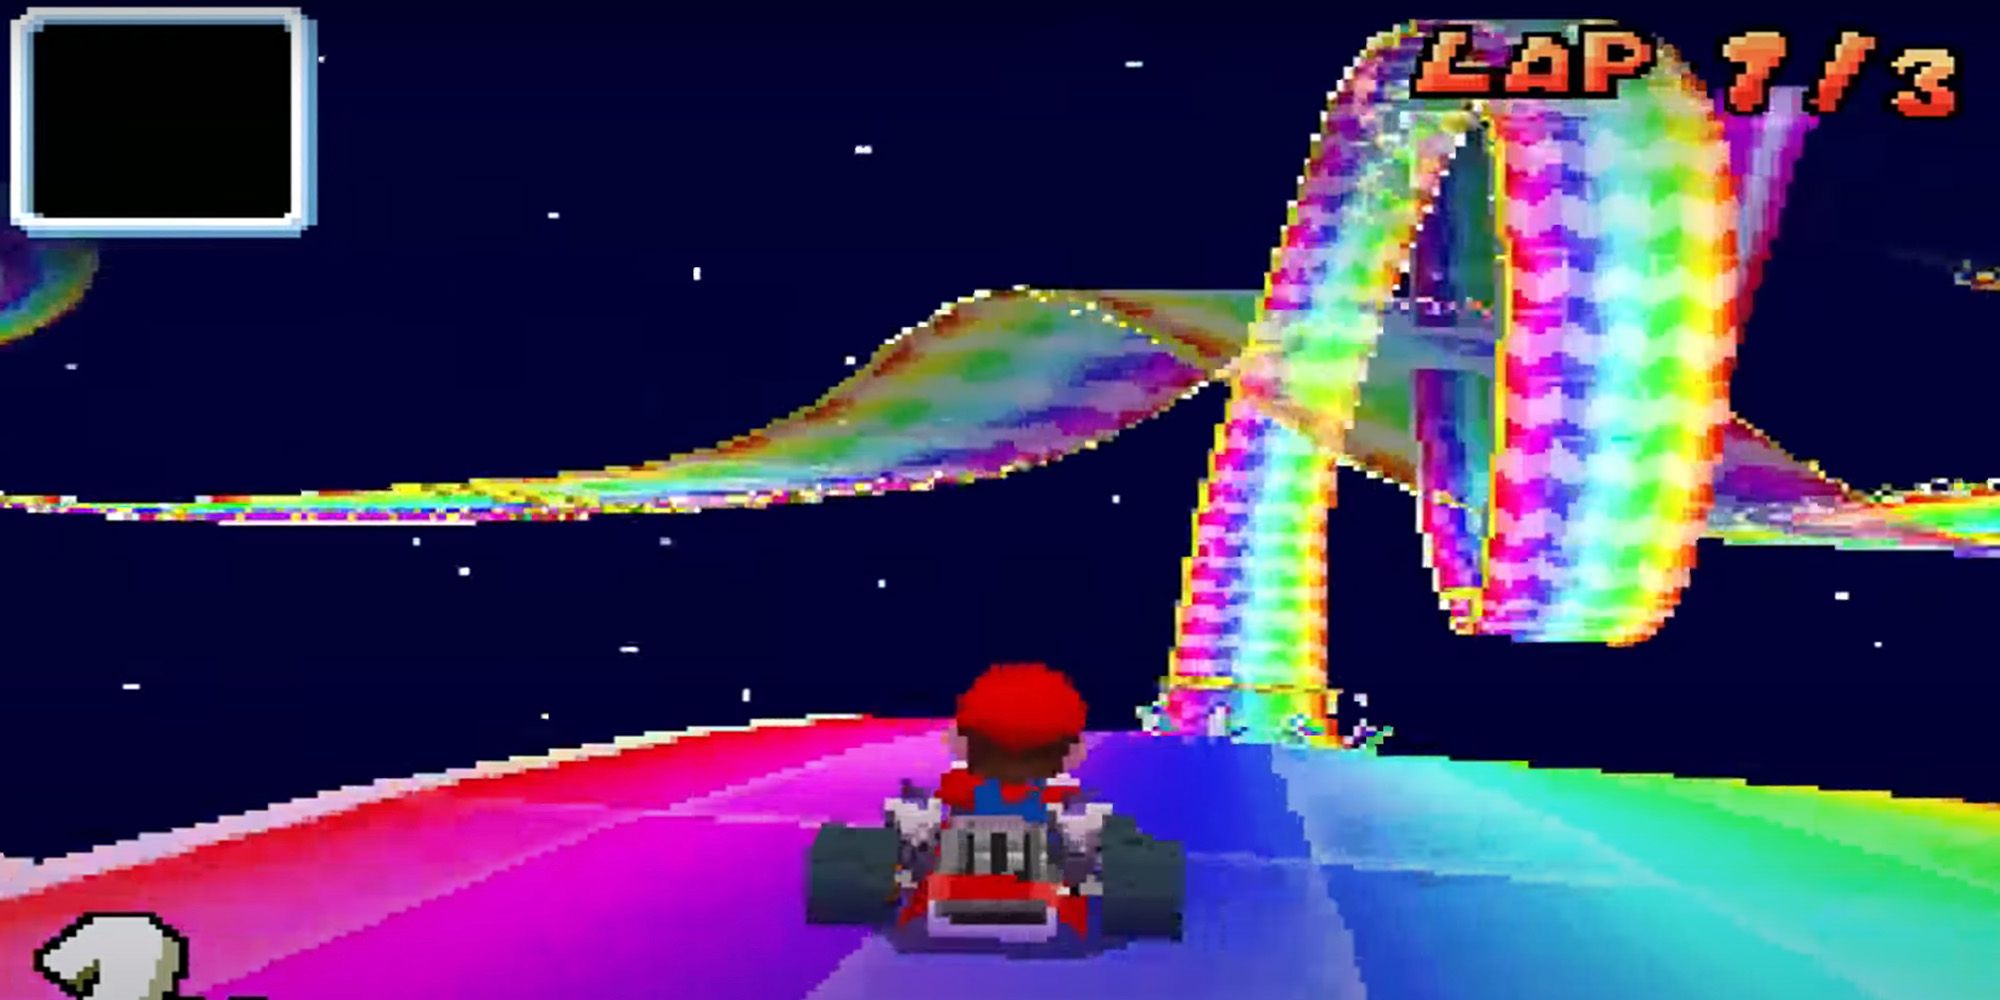 Mario Kart DS - Mario about to go through a loop in Rainbow Road